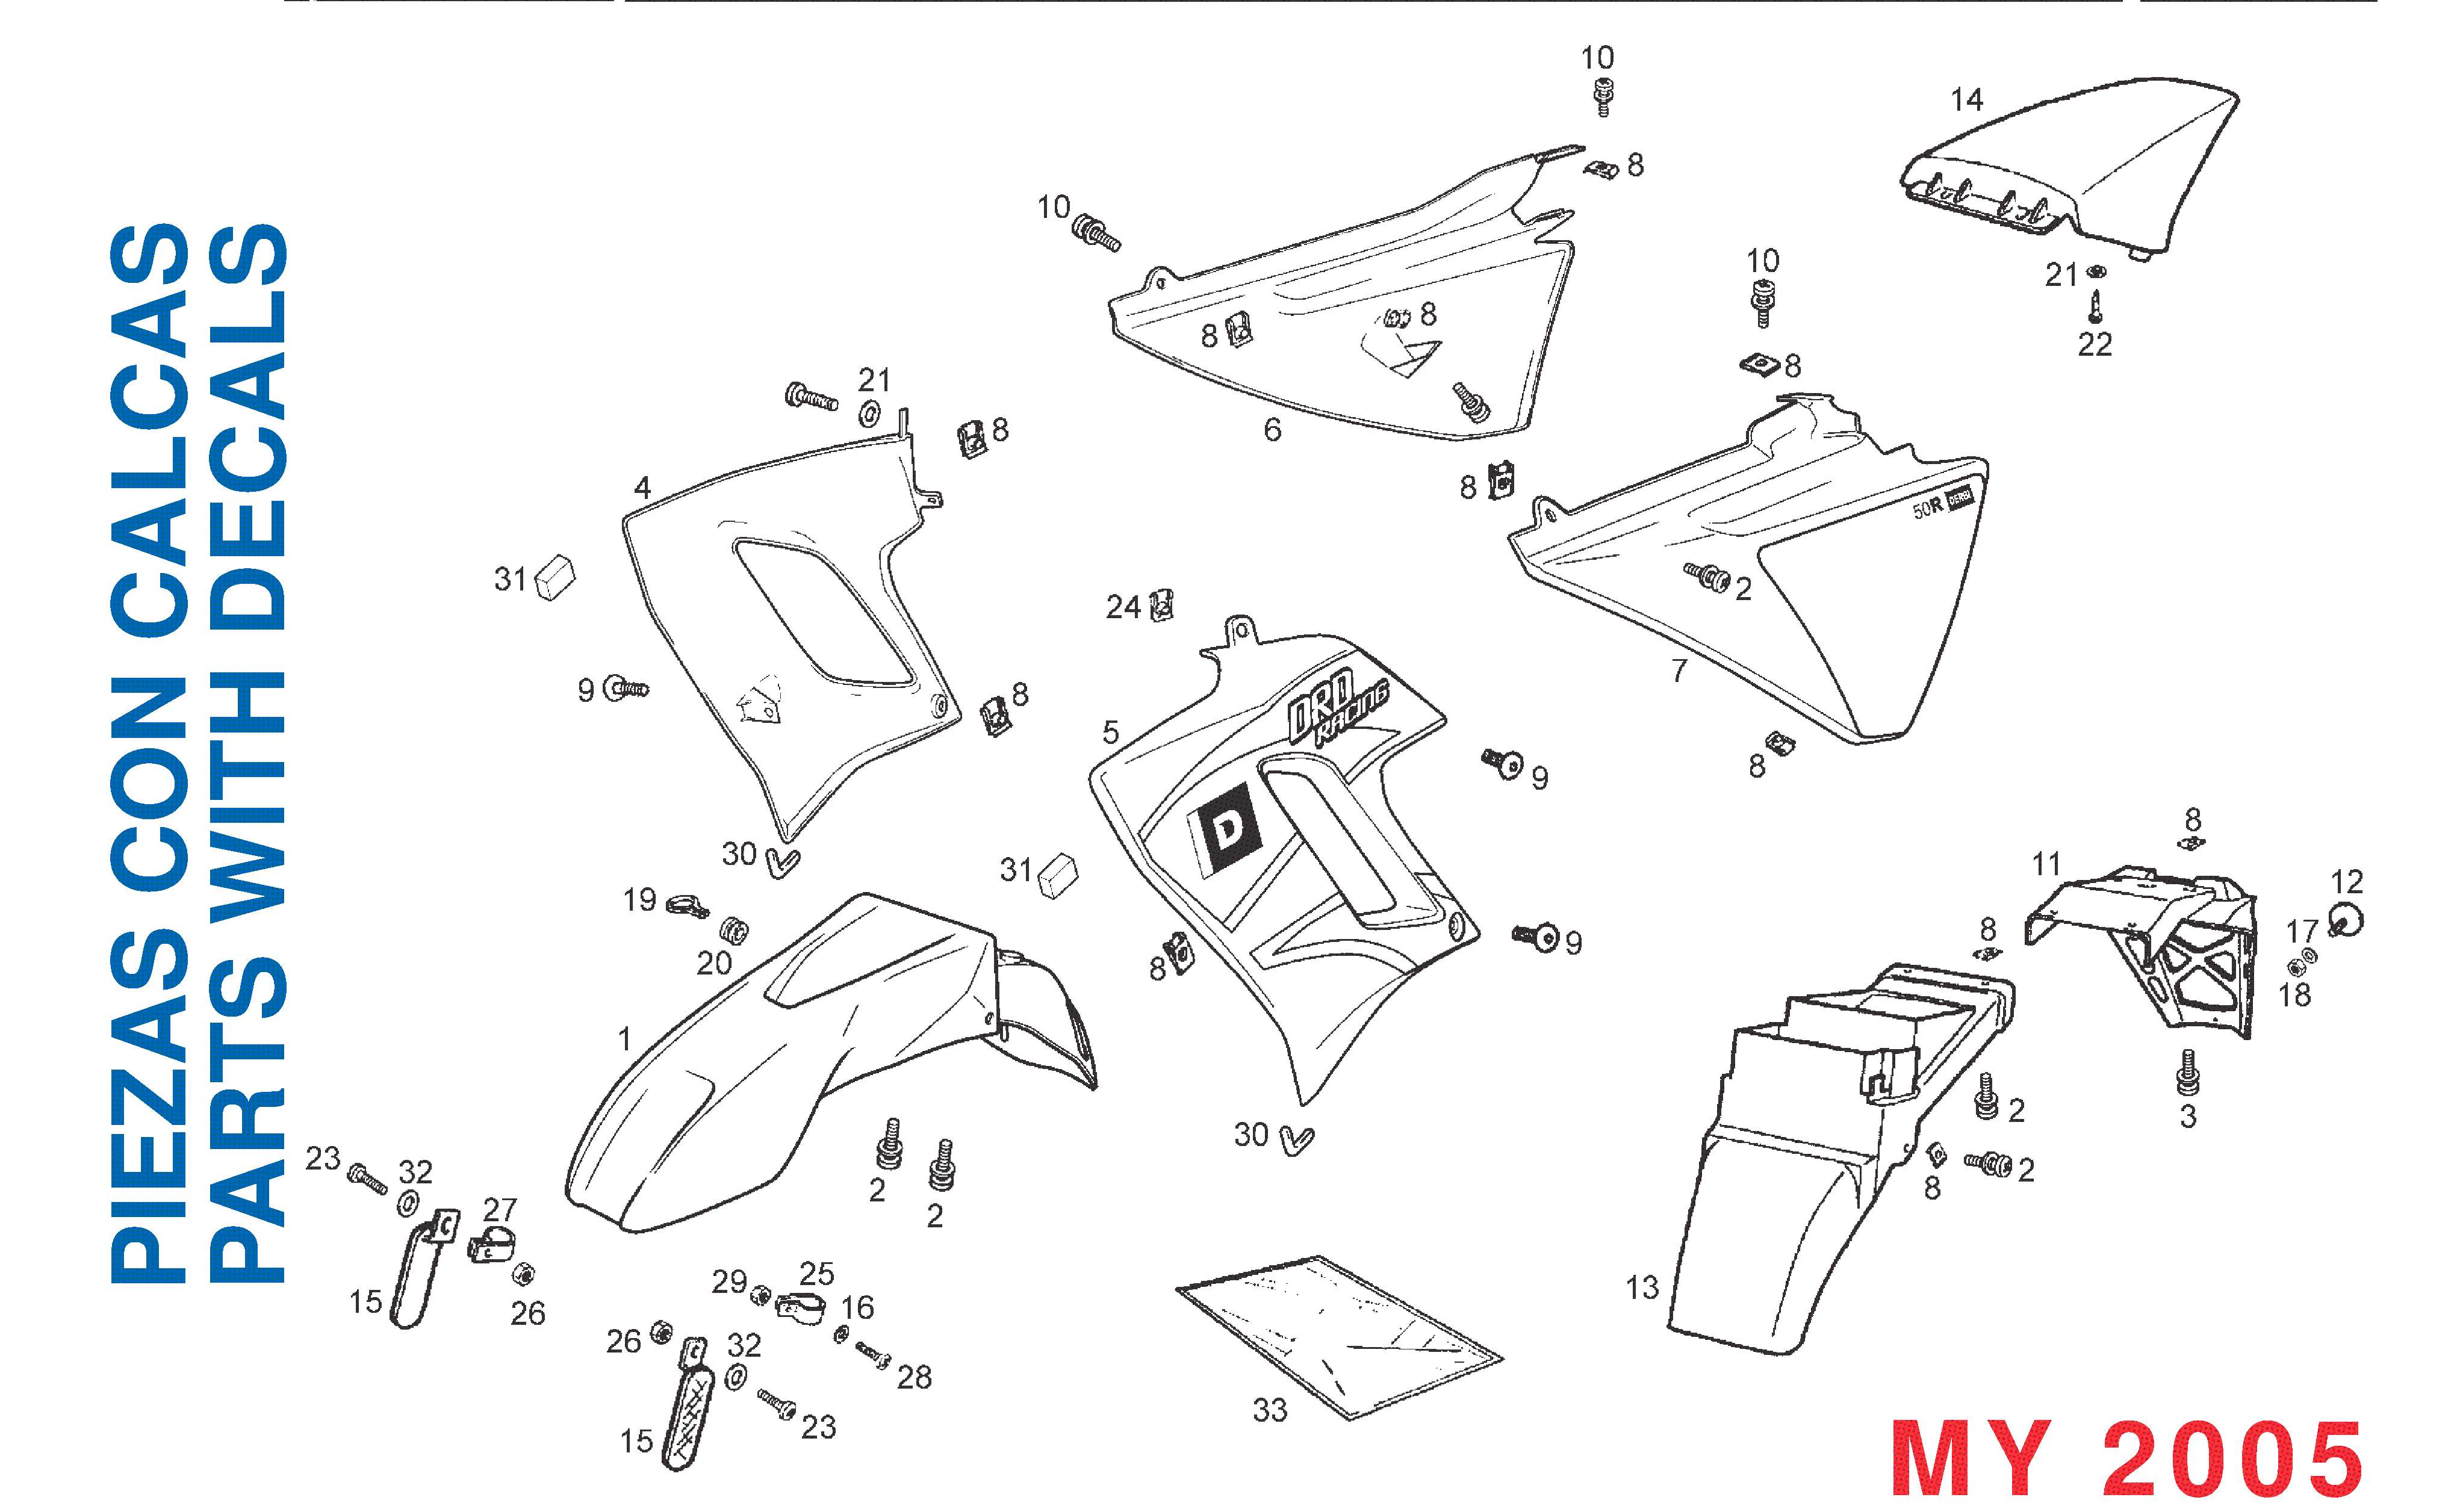 CHASSIS COMPONENTS (2005)